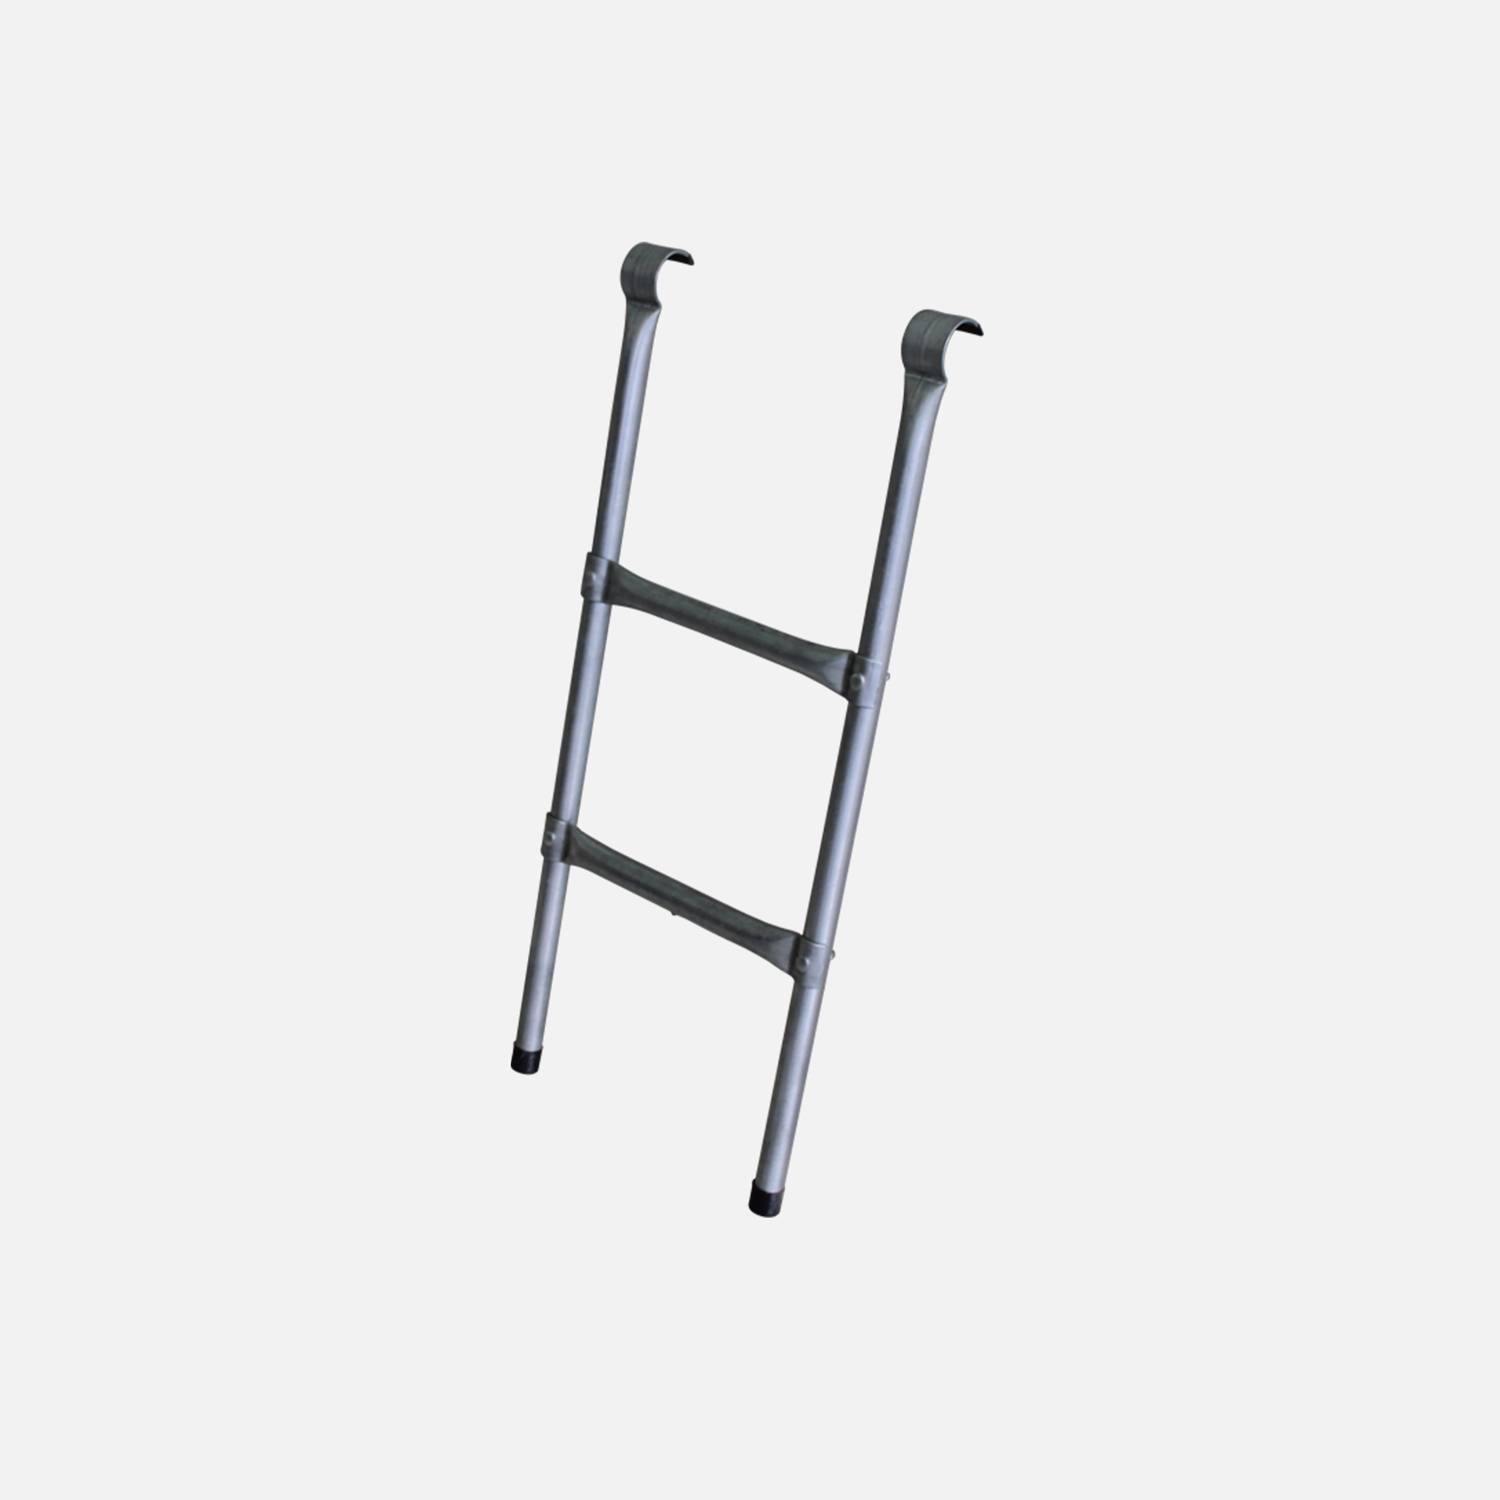 Ladder for trampoline with a diameter of 245 or 250 cm - Made of steel - PRO quality - EU standards. Photo1